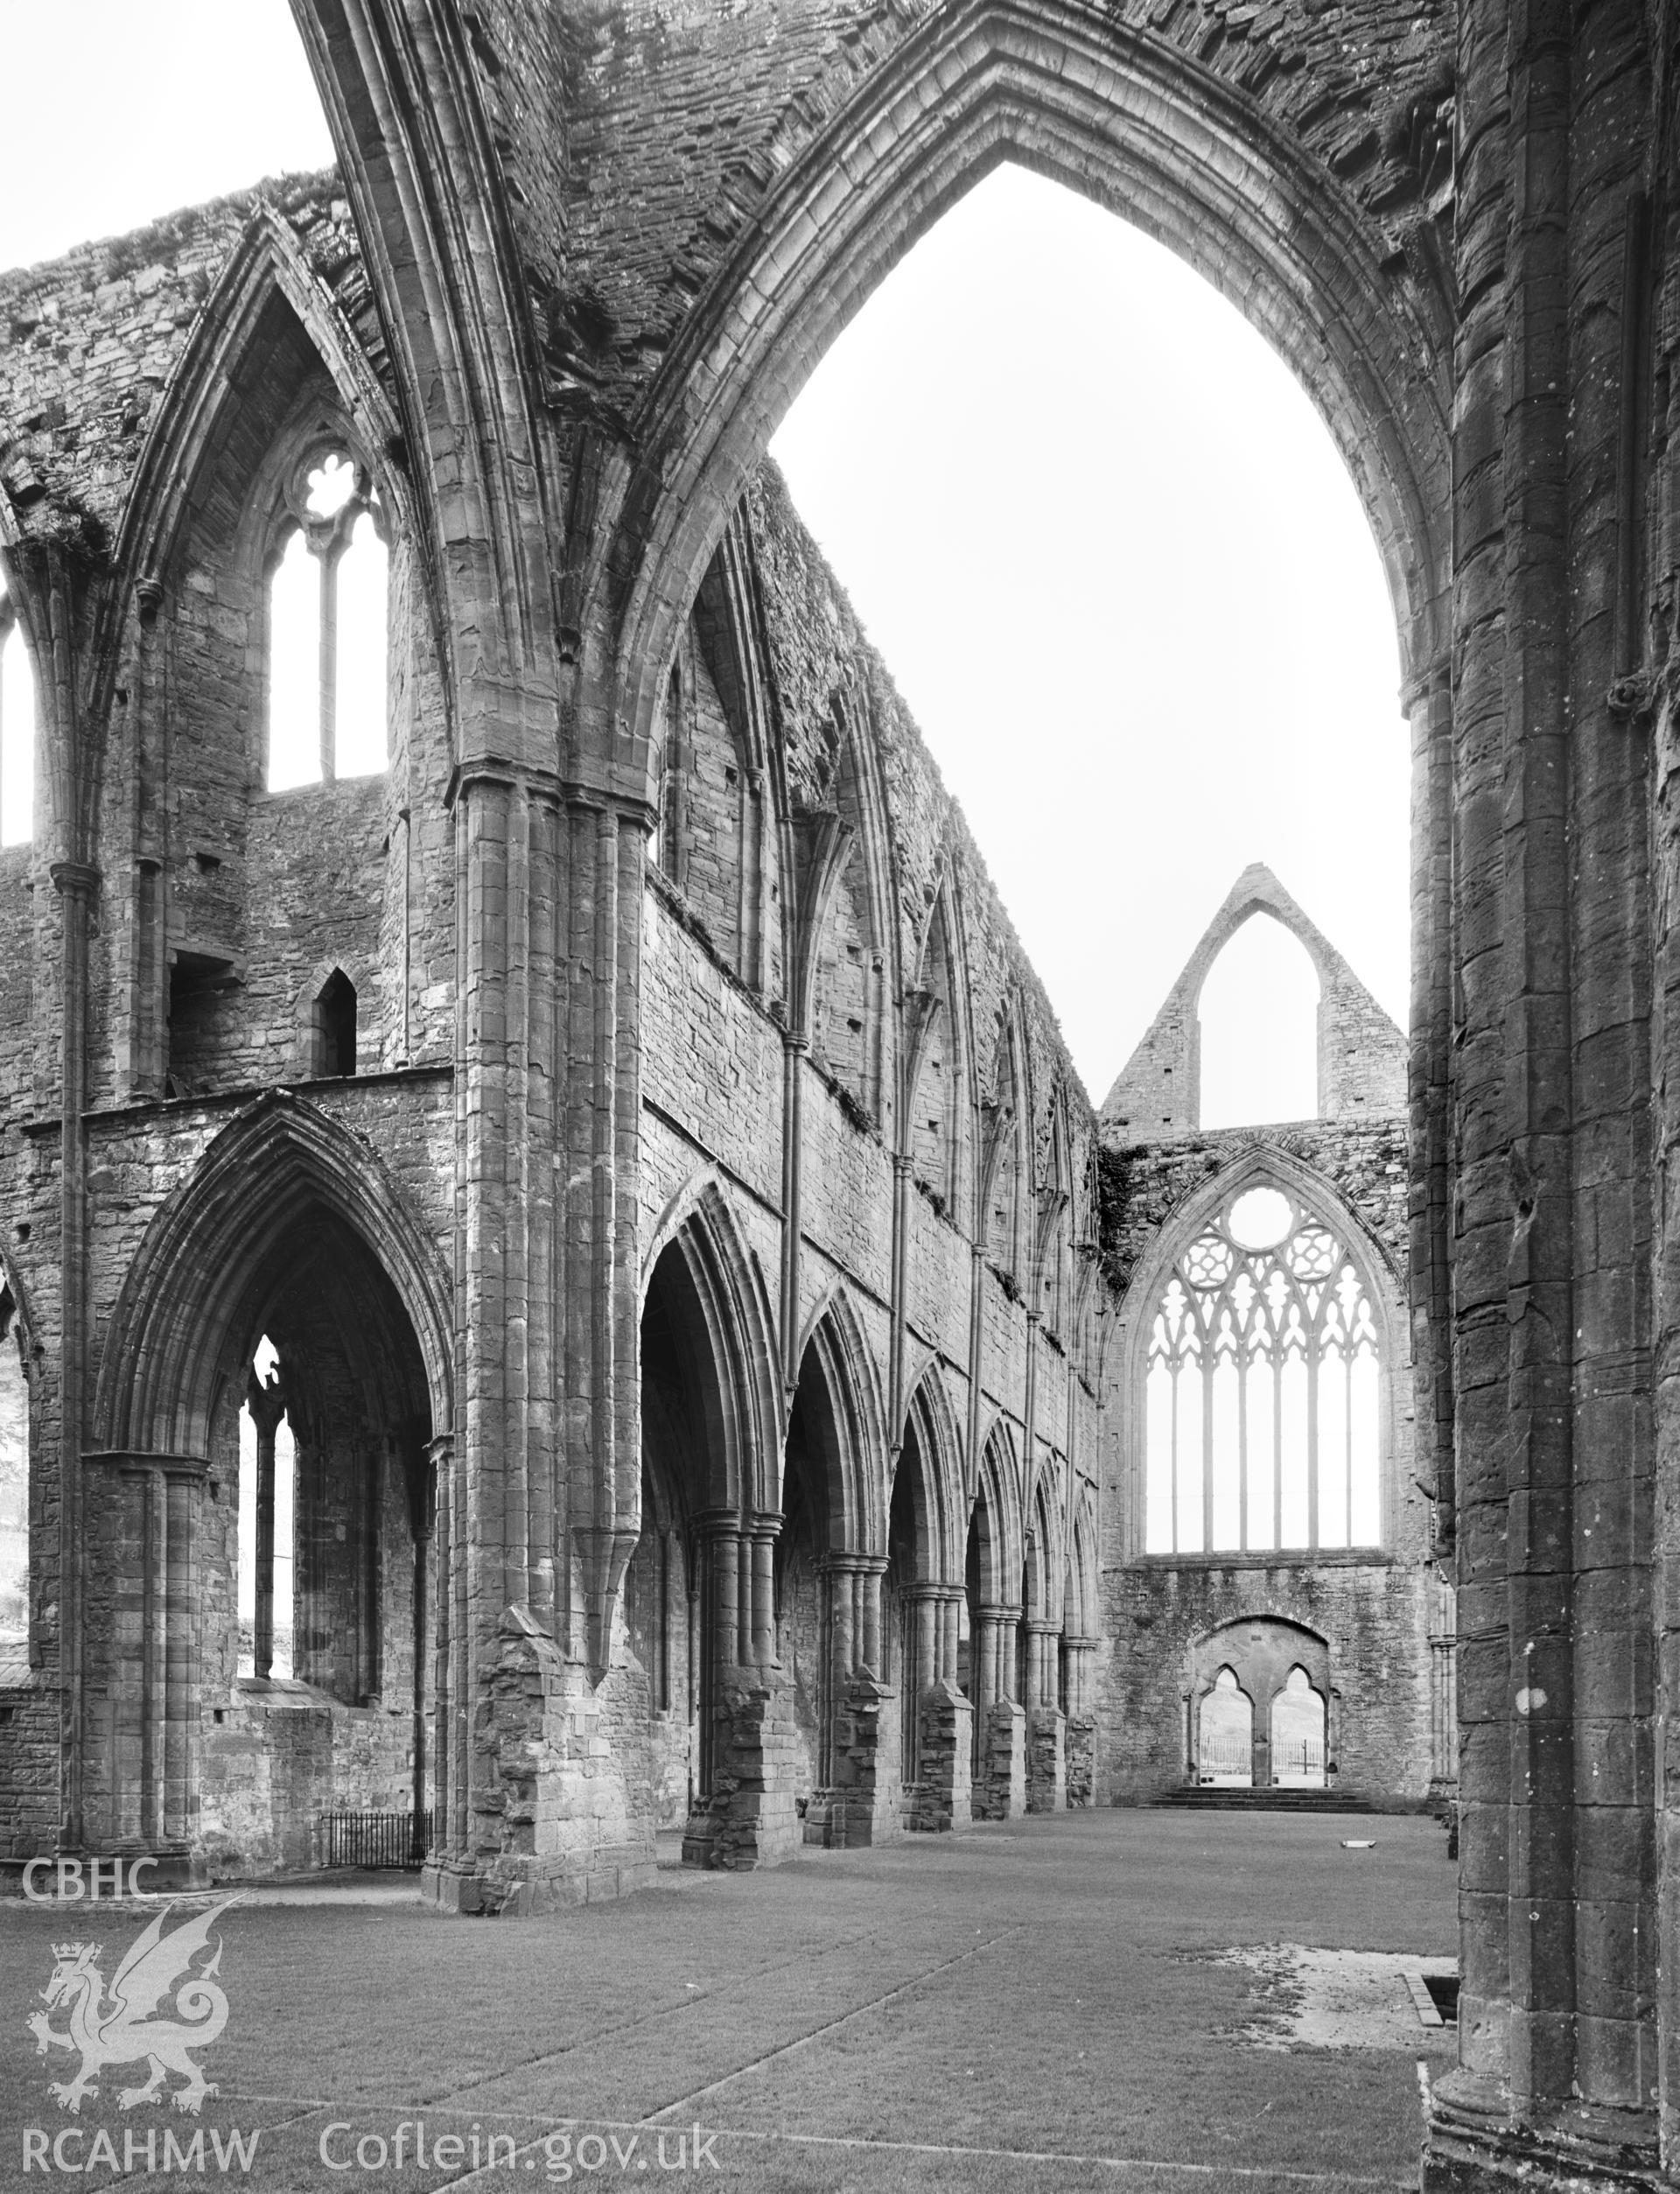 1 b/w print showing exterior view of Tintern Abbey; collated by the former Central Office of Information.